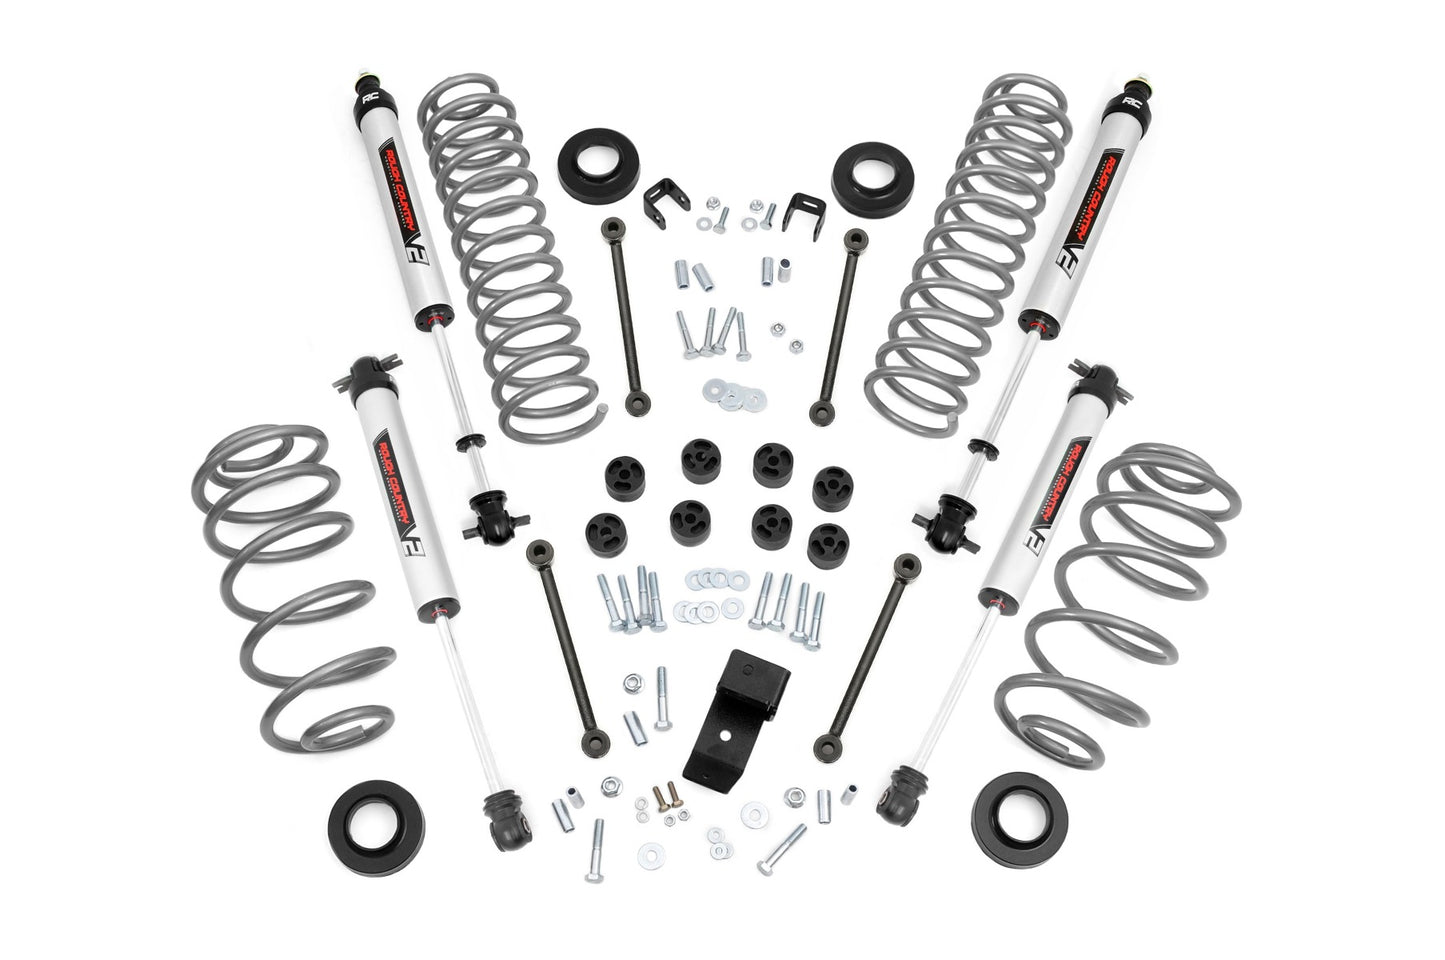 Rough Country (64270) 3.25 Inch Lift Kit | 6 Cyl | V2 | Jeep Wrangler TJ 4WD (1997-2002)